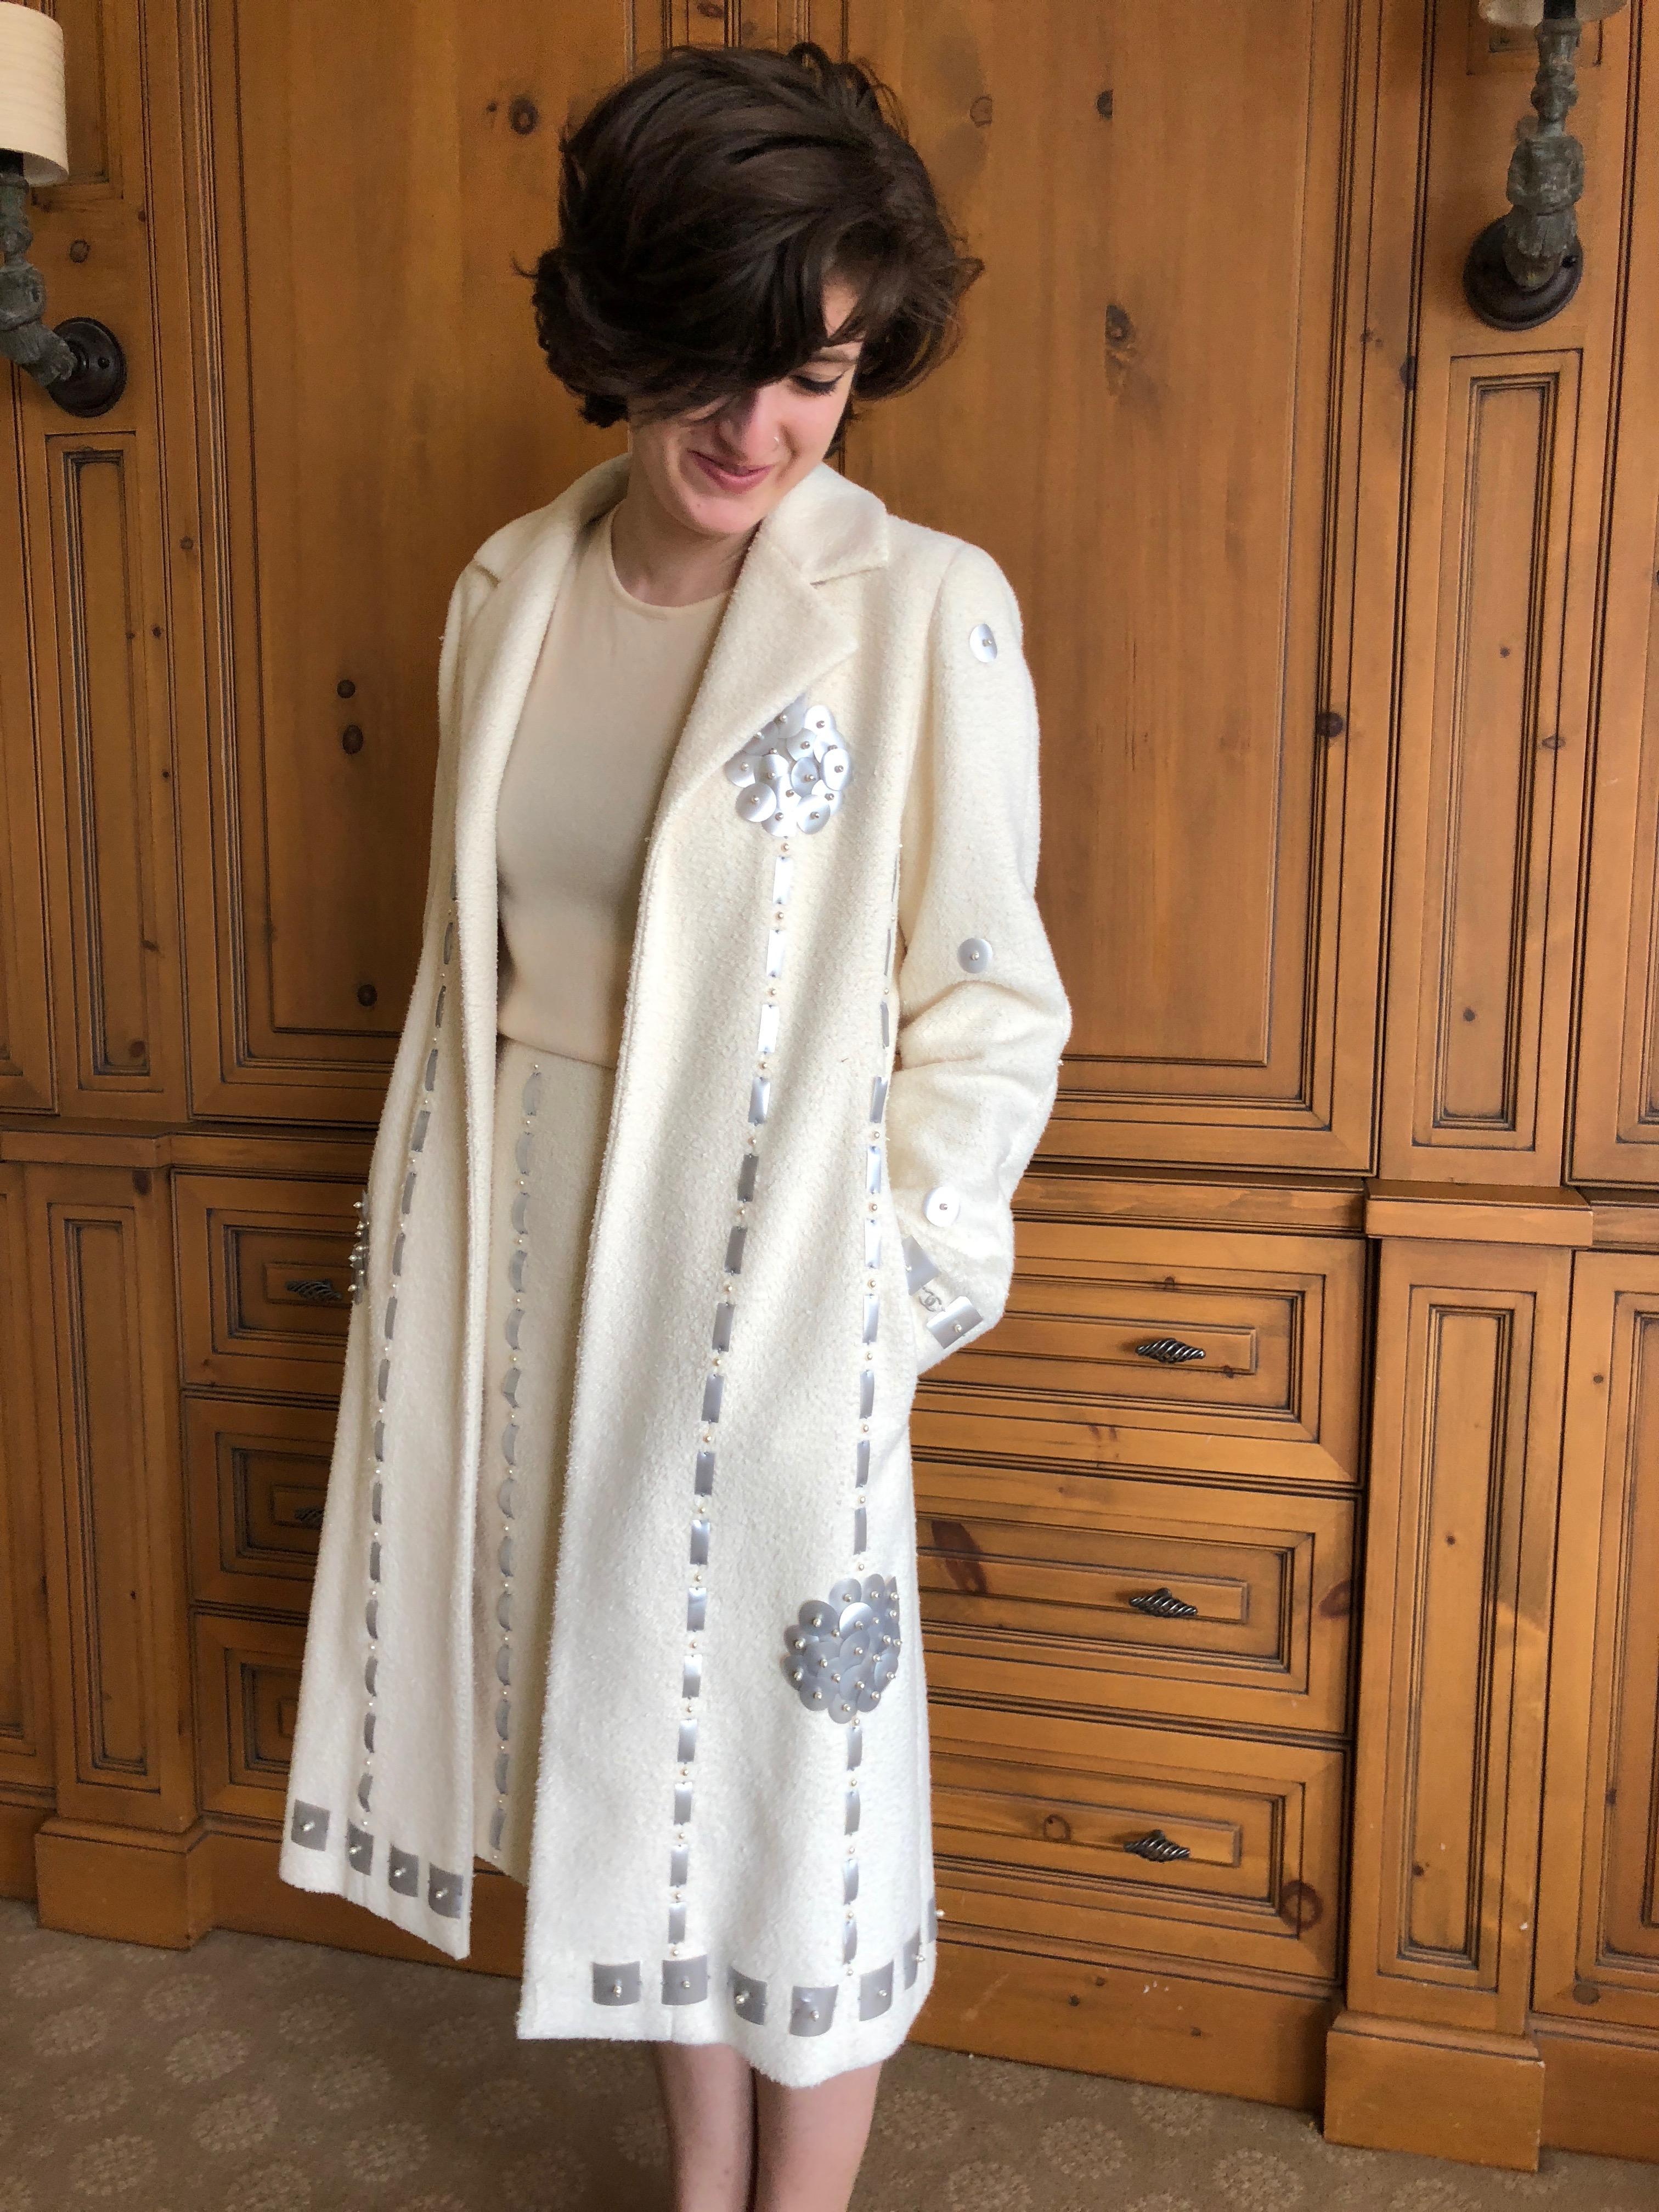 Chanel Ivory Embellished Three Piece Suit with Silver Paillettes, Autumn 2000  In Excellent Condition For Sale In Cloverdale, CA